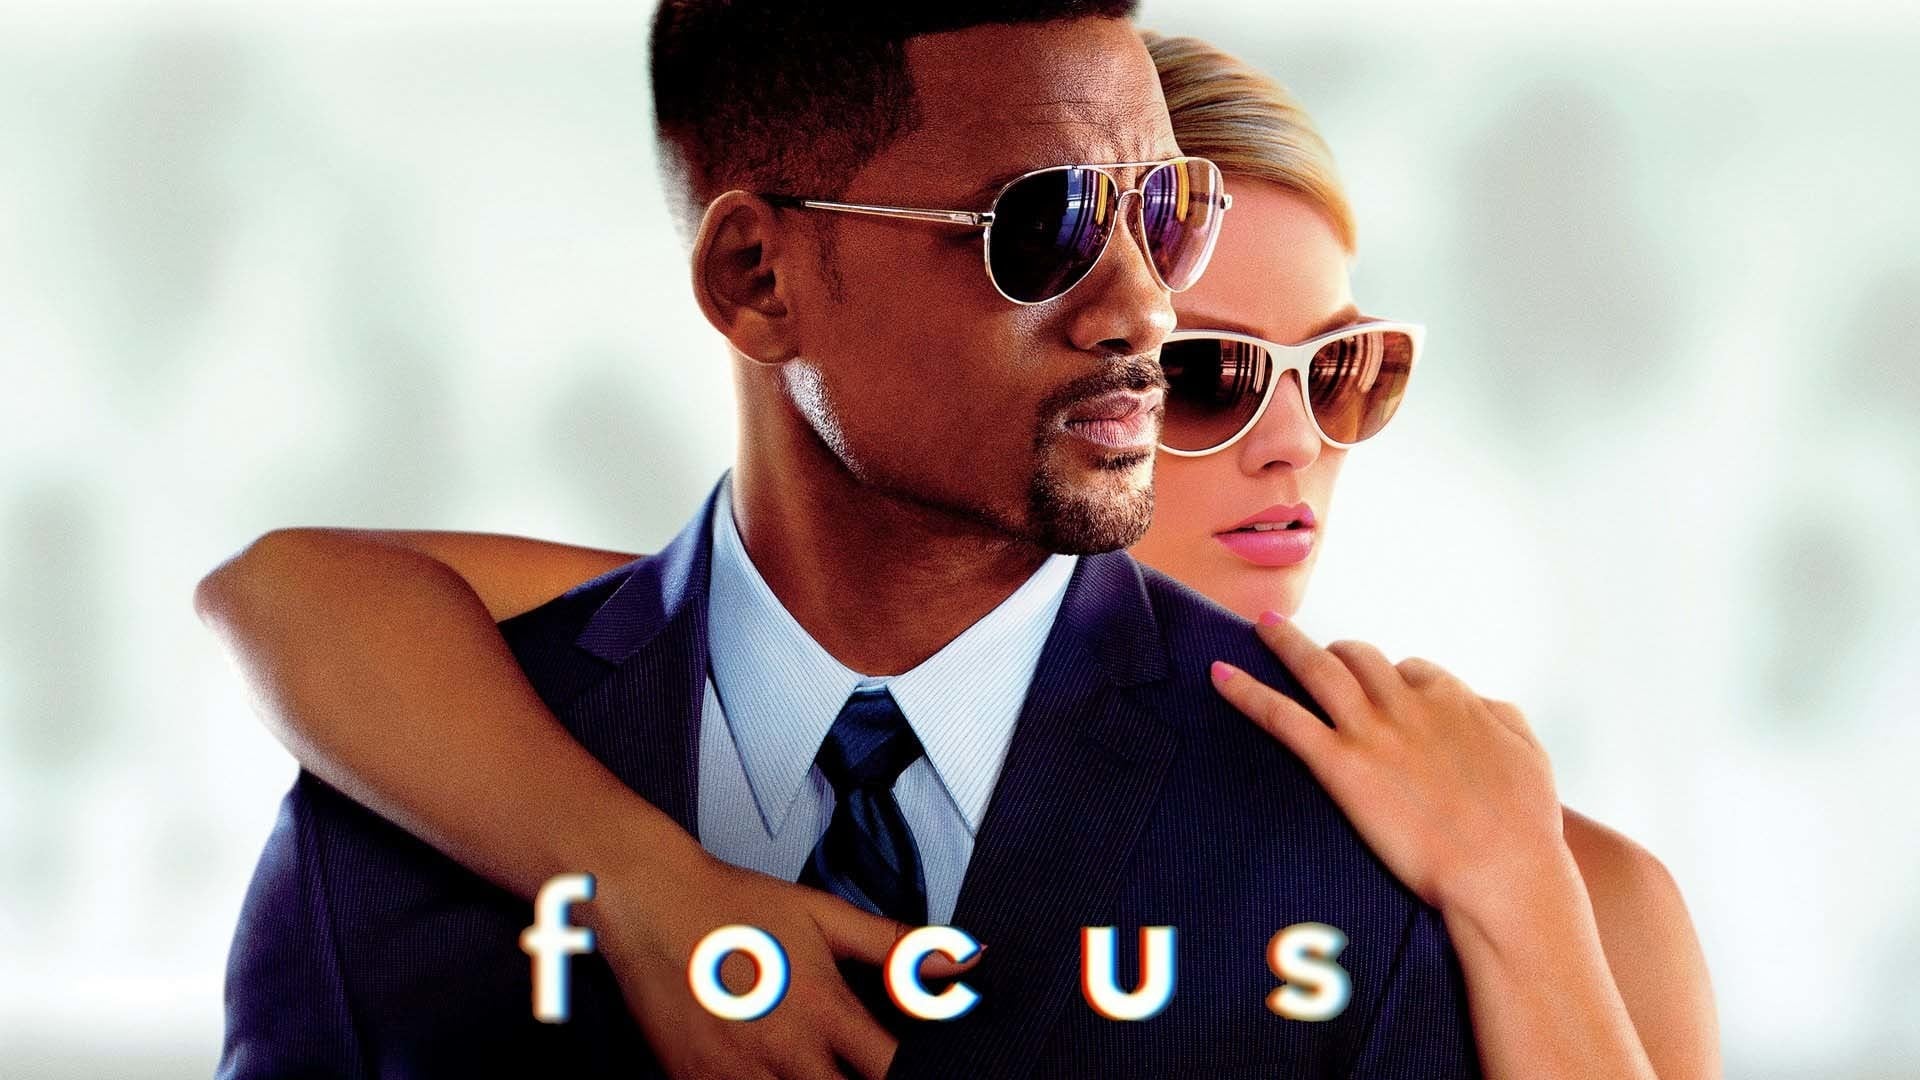 focus movie rating and review